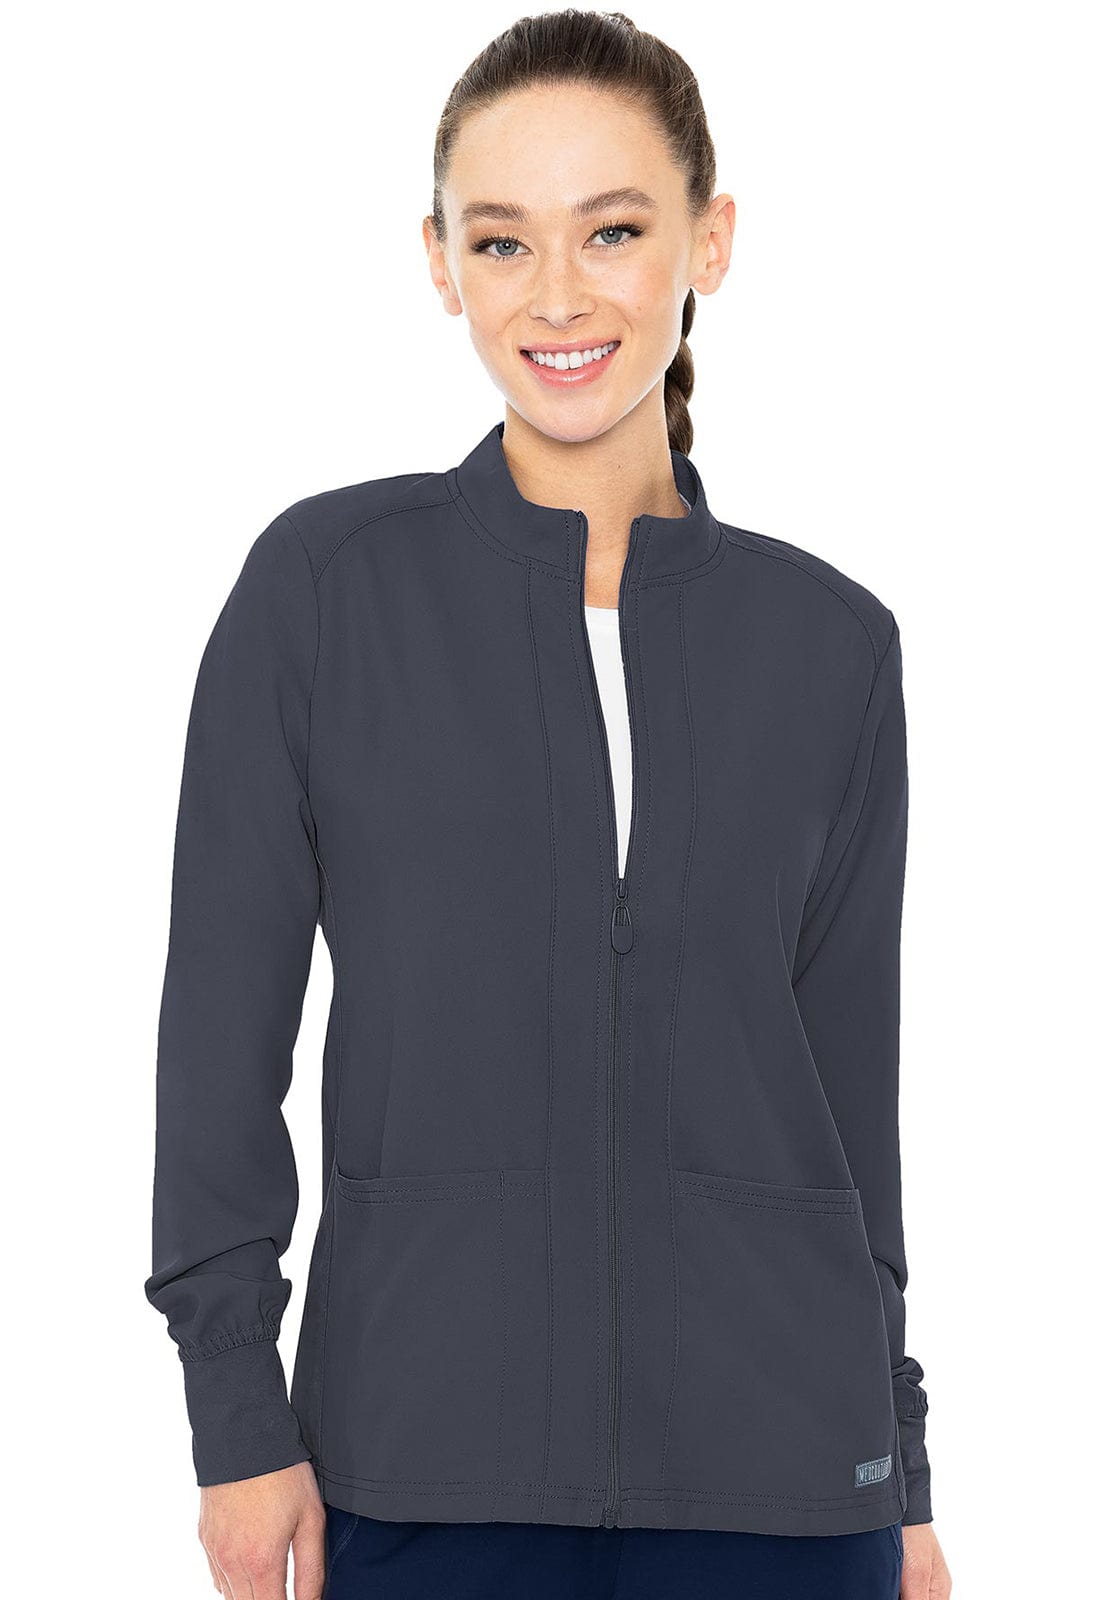 Med Couture MC Insight Pewter / XS MC Insight  Zip Front Warm-Up Scrub Jacket With Shoulder Yokes MC2660